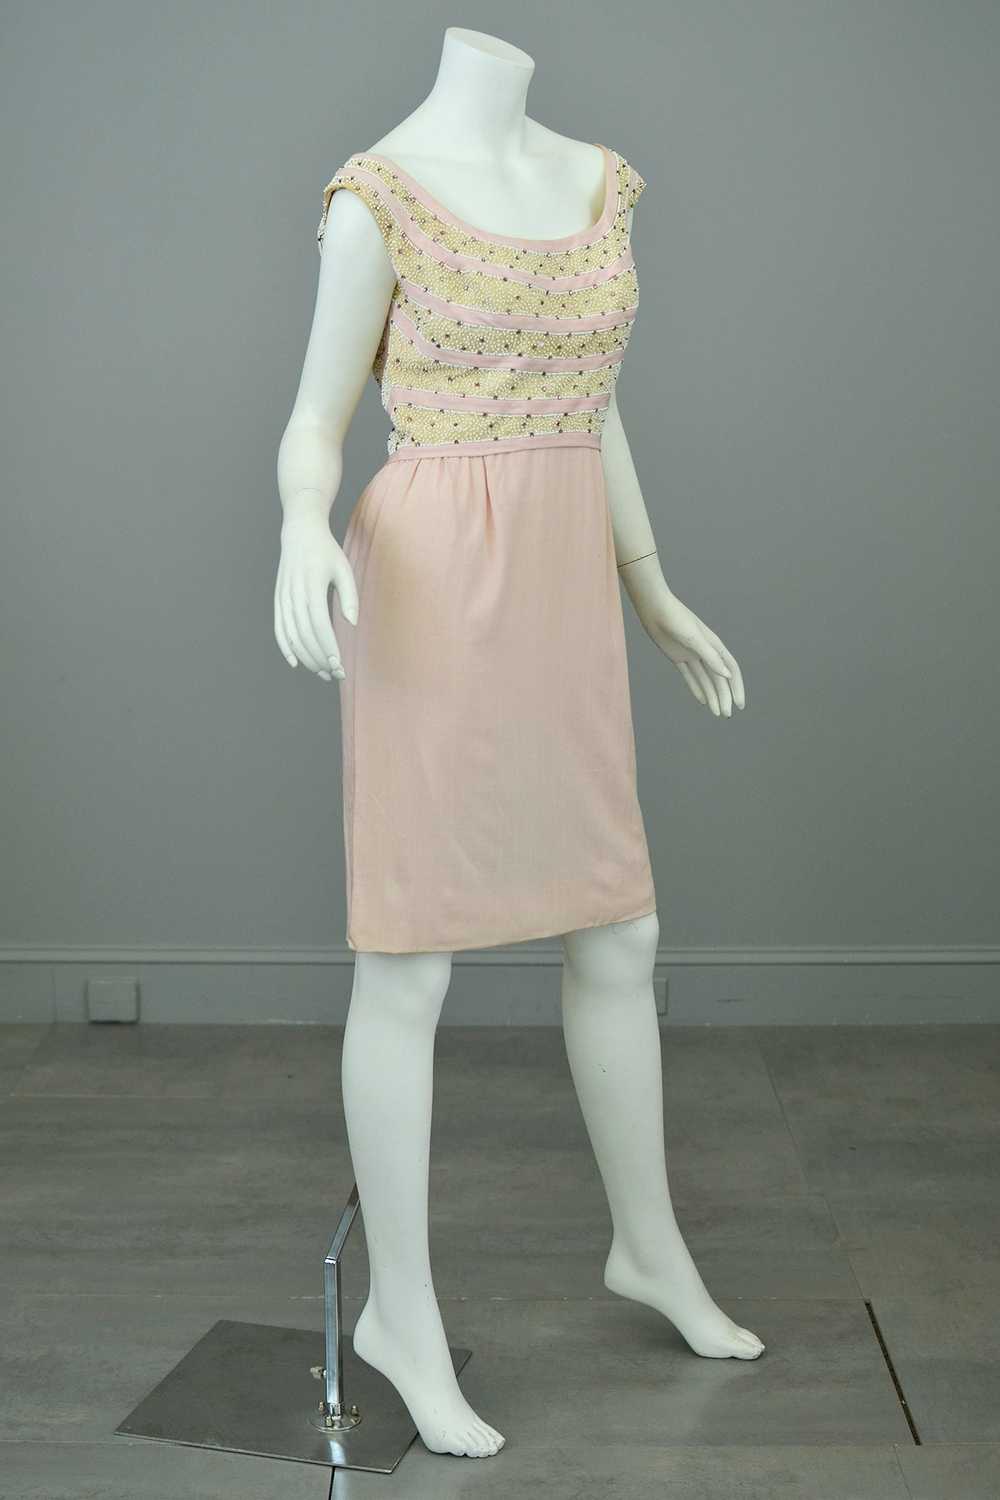 1960s Pale Pink Beaded Short Cocktail Dress - image 4